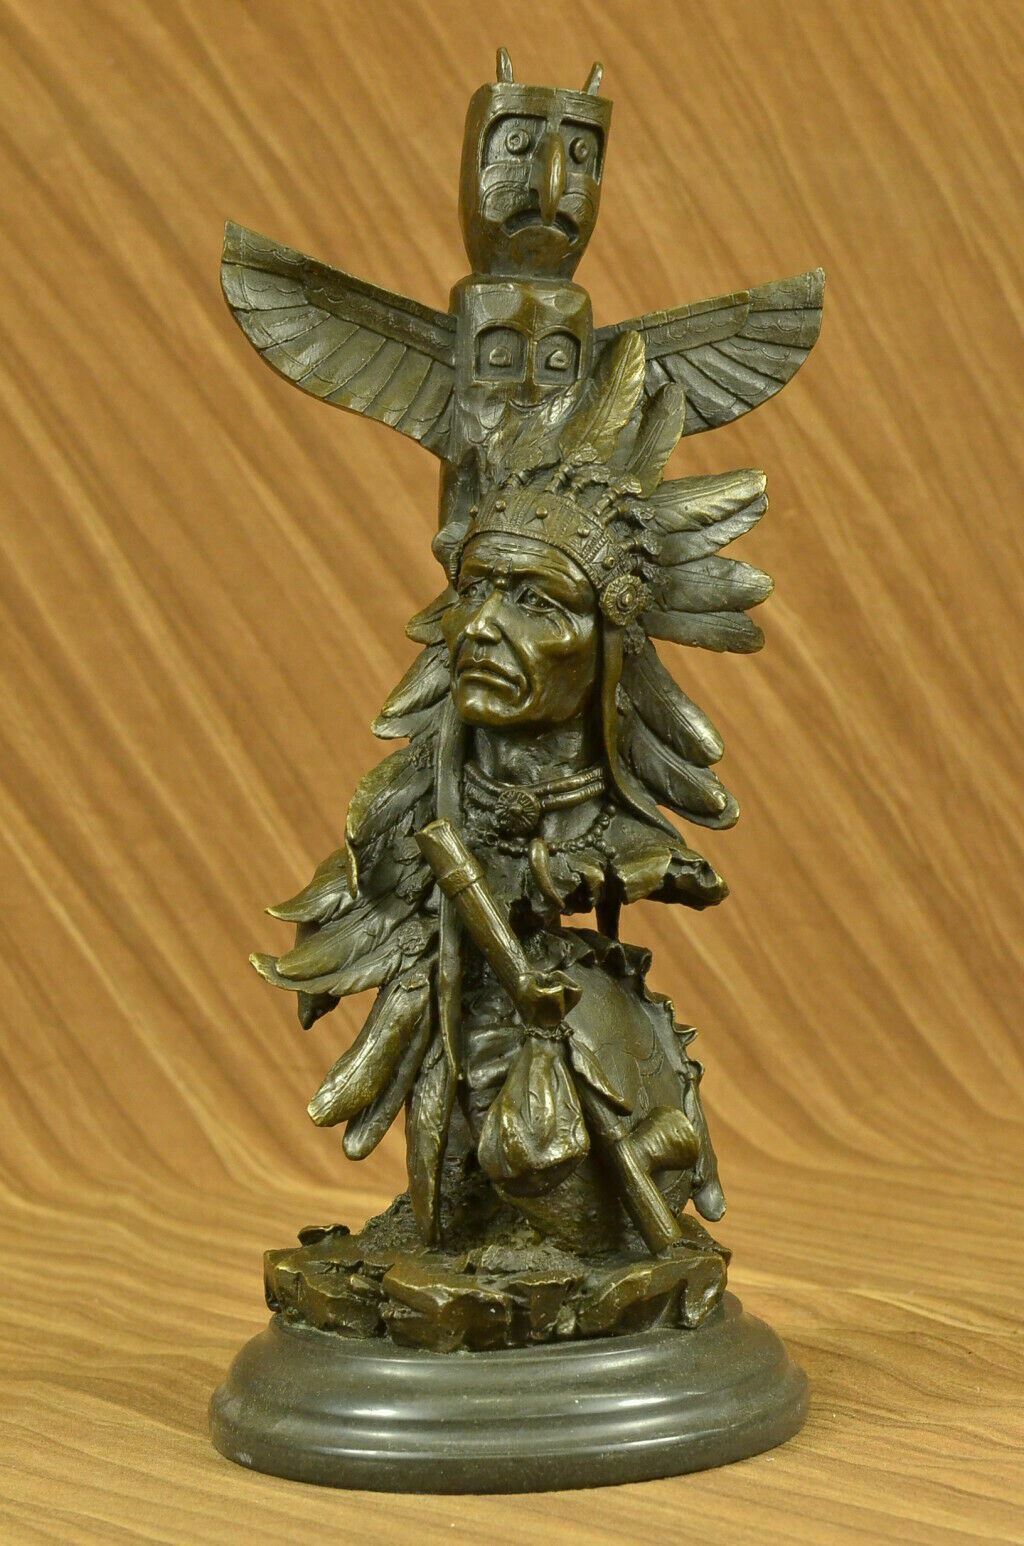 NATIVE AMERICAN INDIAN CHIEF GERONIMO BUST SPEAR BRONZE FIGURINE ART SIGNED GIFT